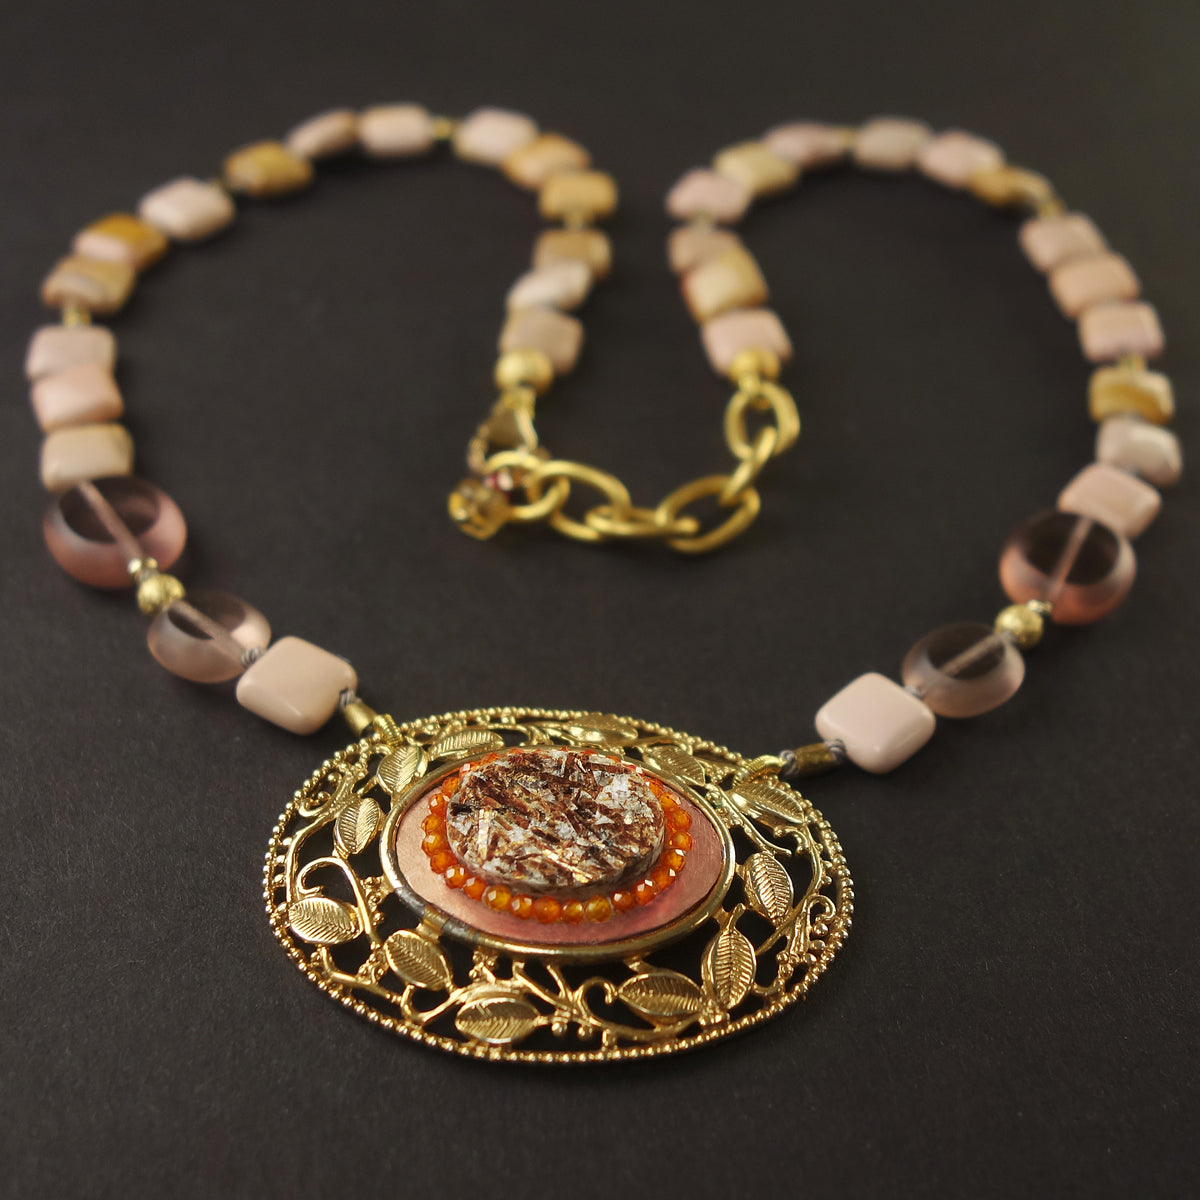 Consequently, She Bloomed: vintage gold, pink opal, carnelian mosaic necklace